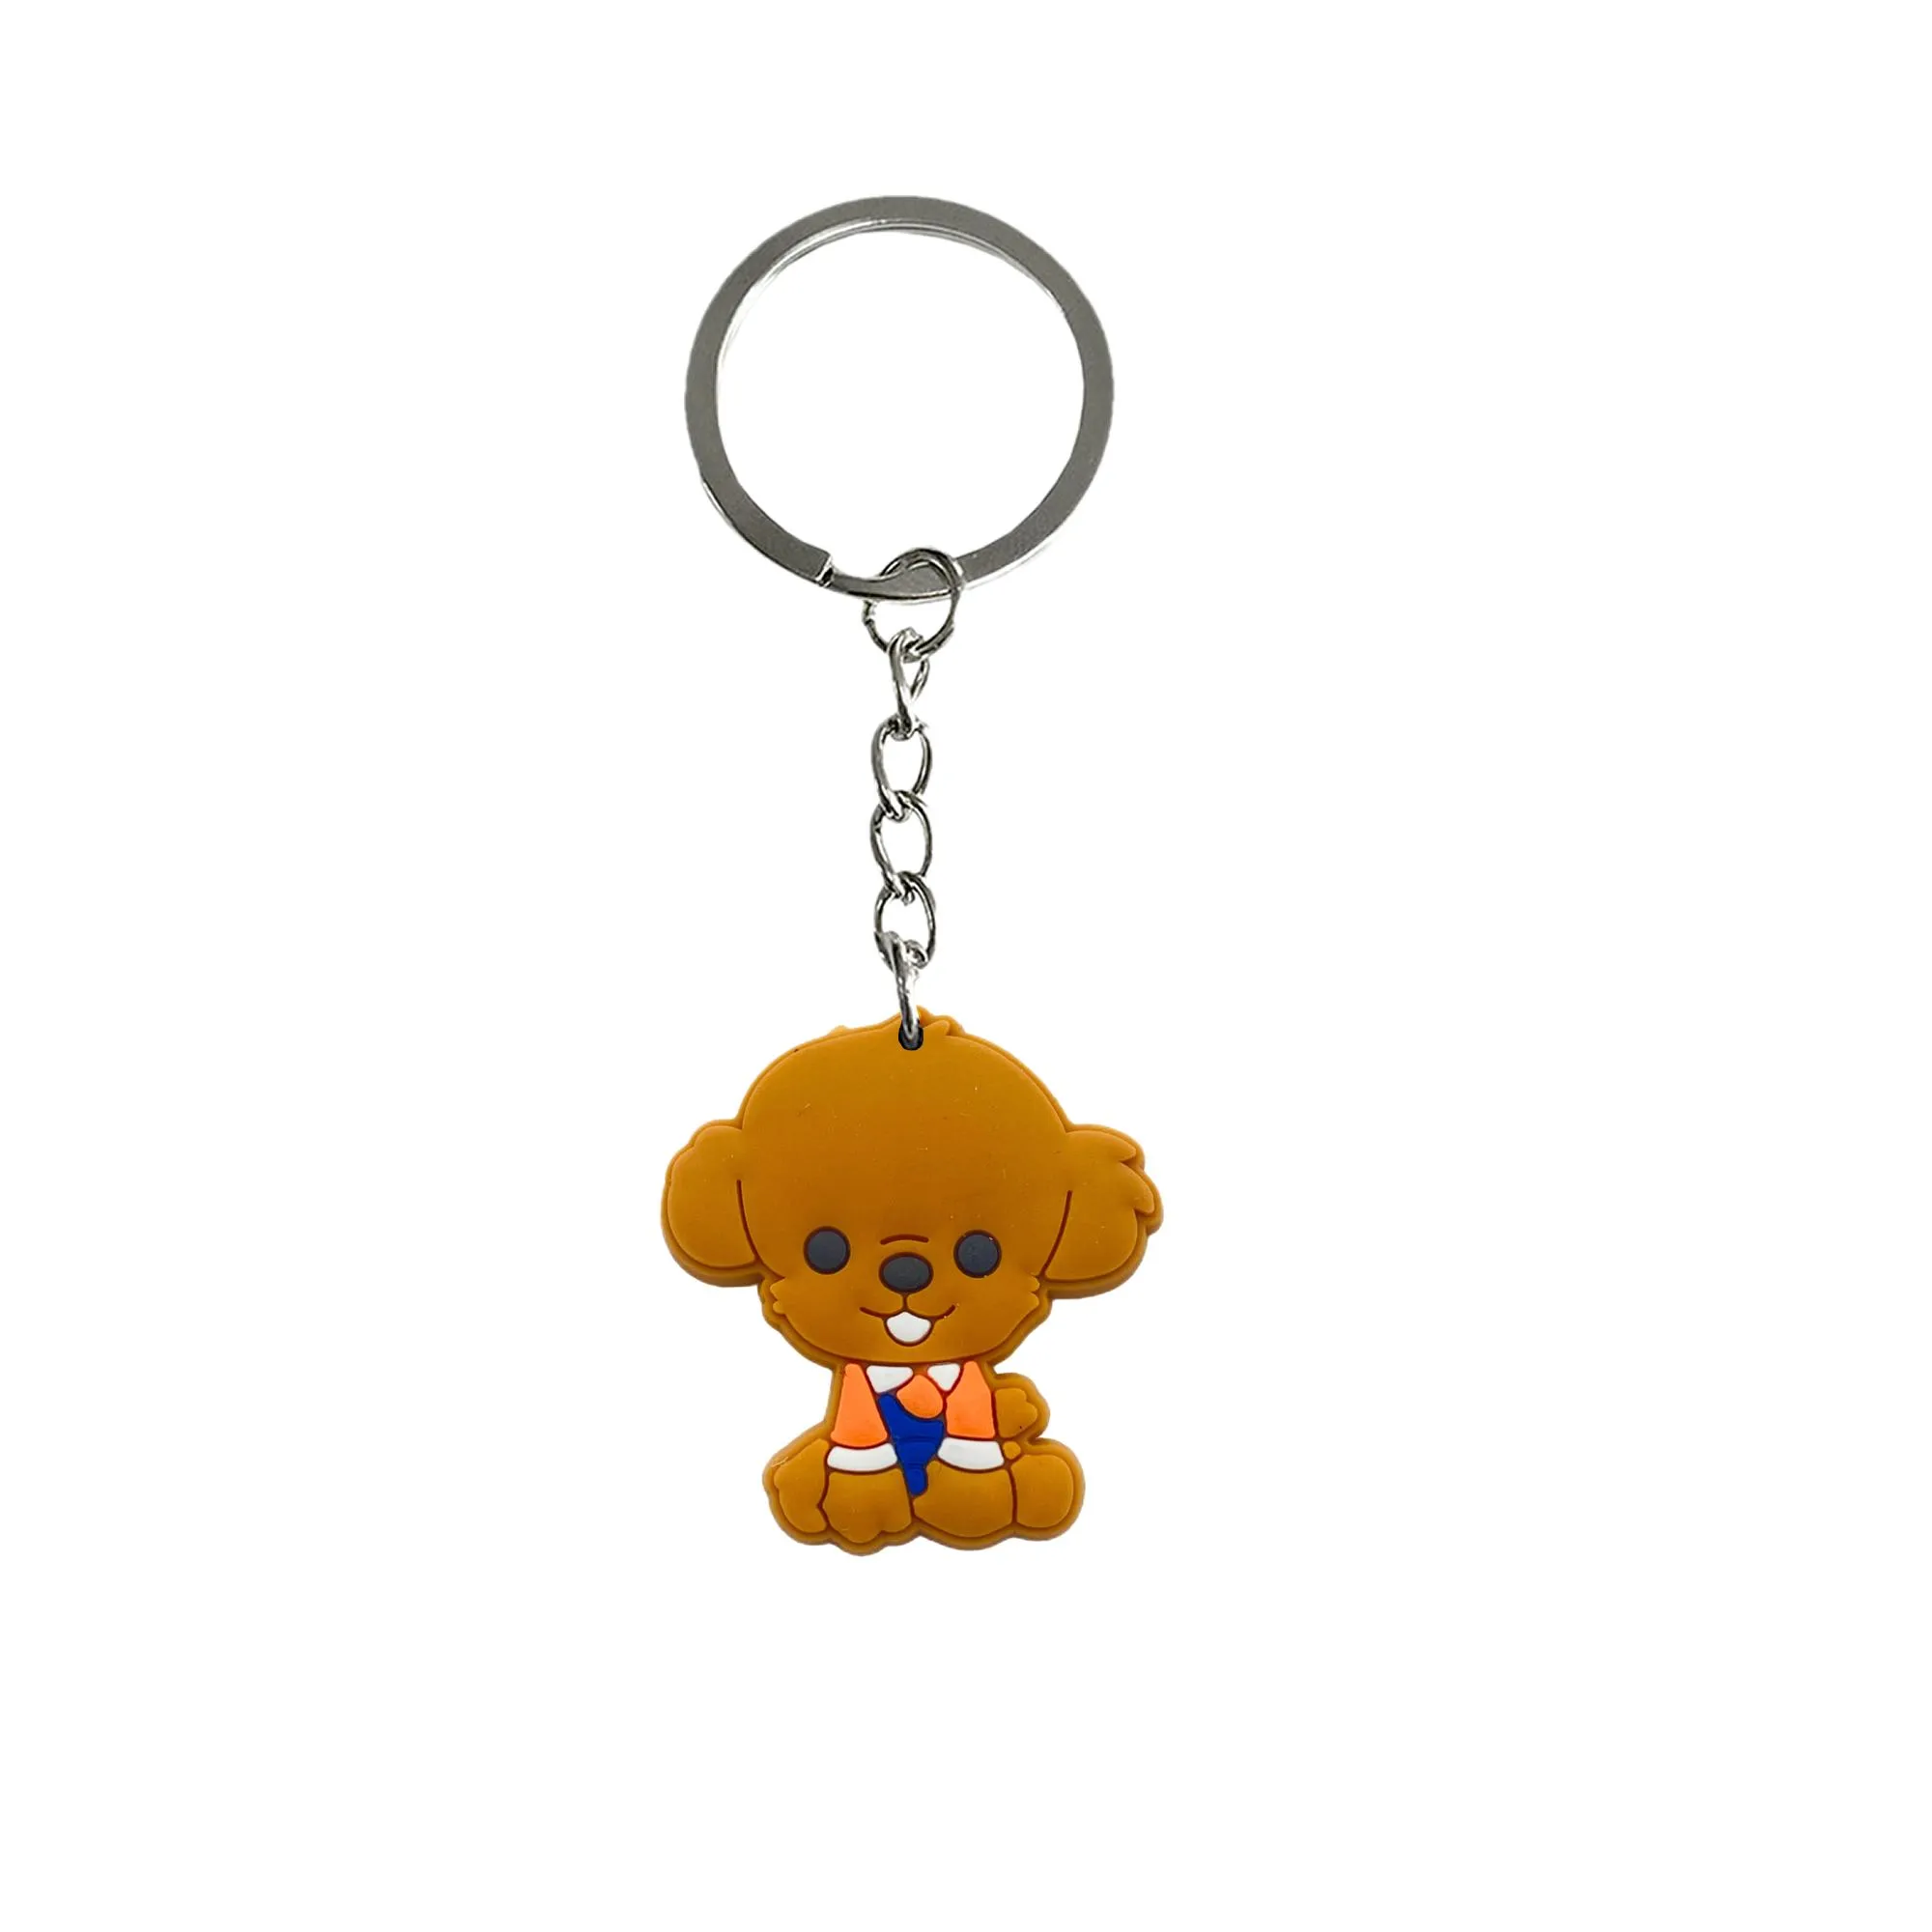 dog series 32 keychain key chain for kid boy girl party favors gift keyring women backpack shoulder bag pendant accessories charm suitable schoolbag keychains rings ring girls